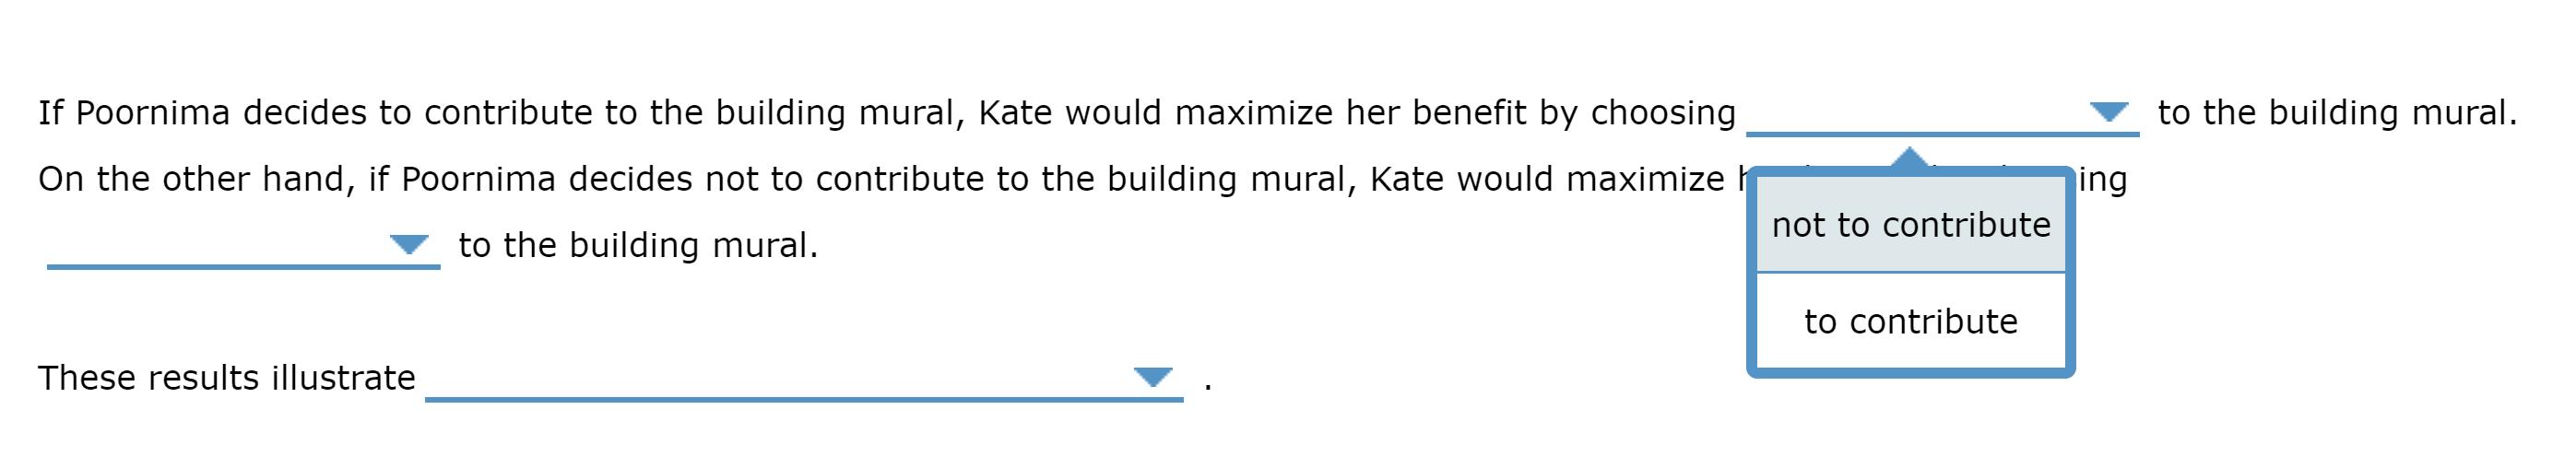 to the building mural. If Poornima decides to contribute to the building mural, Kate would maximize her benefit by choosing O